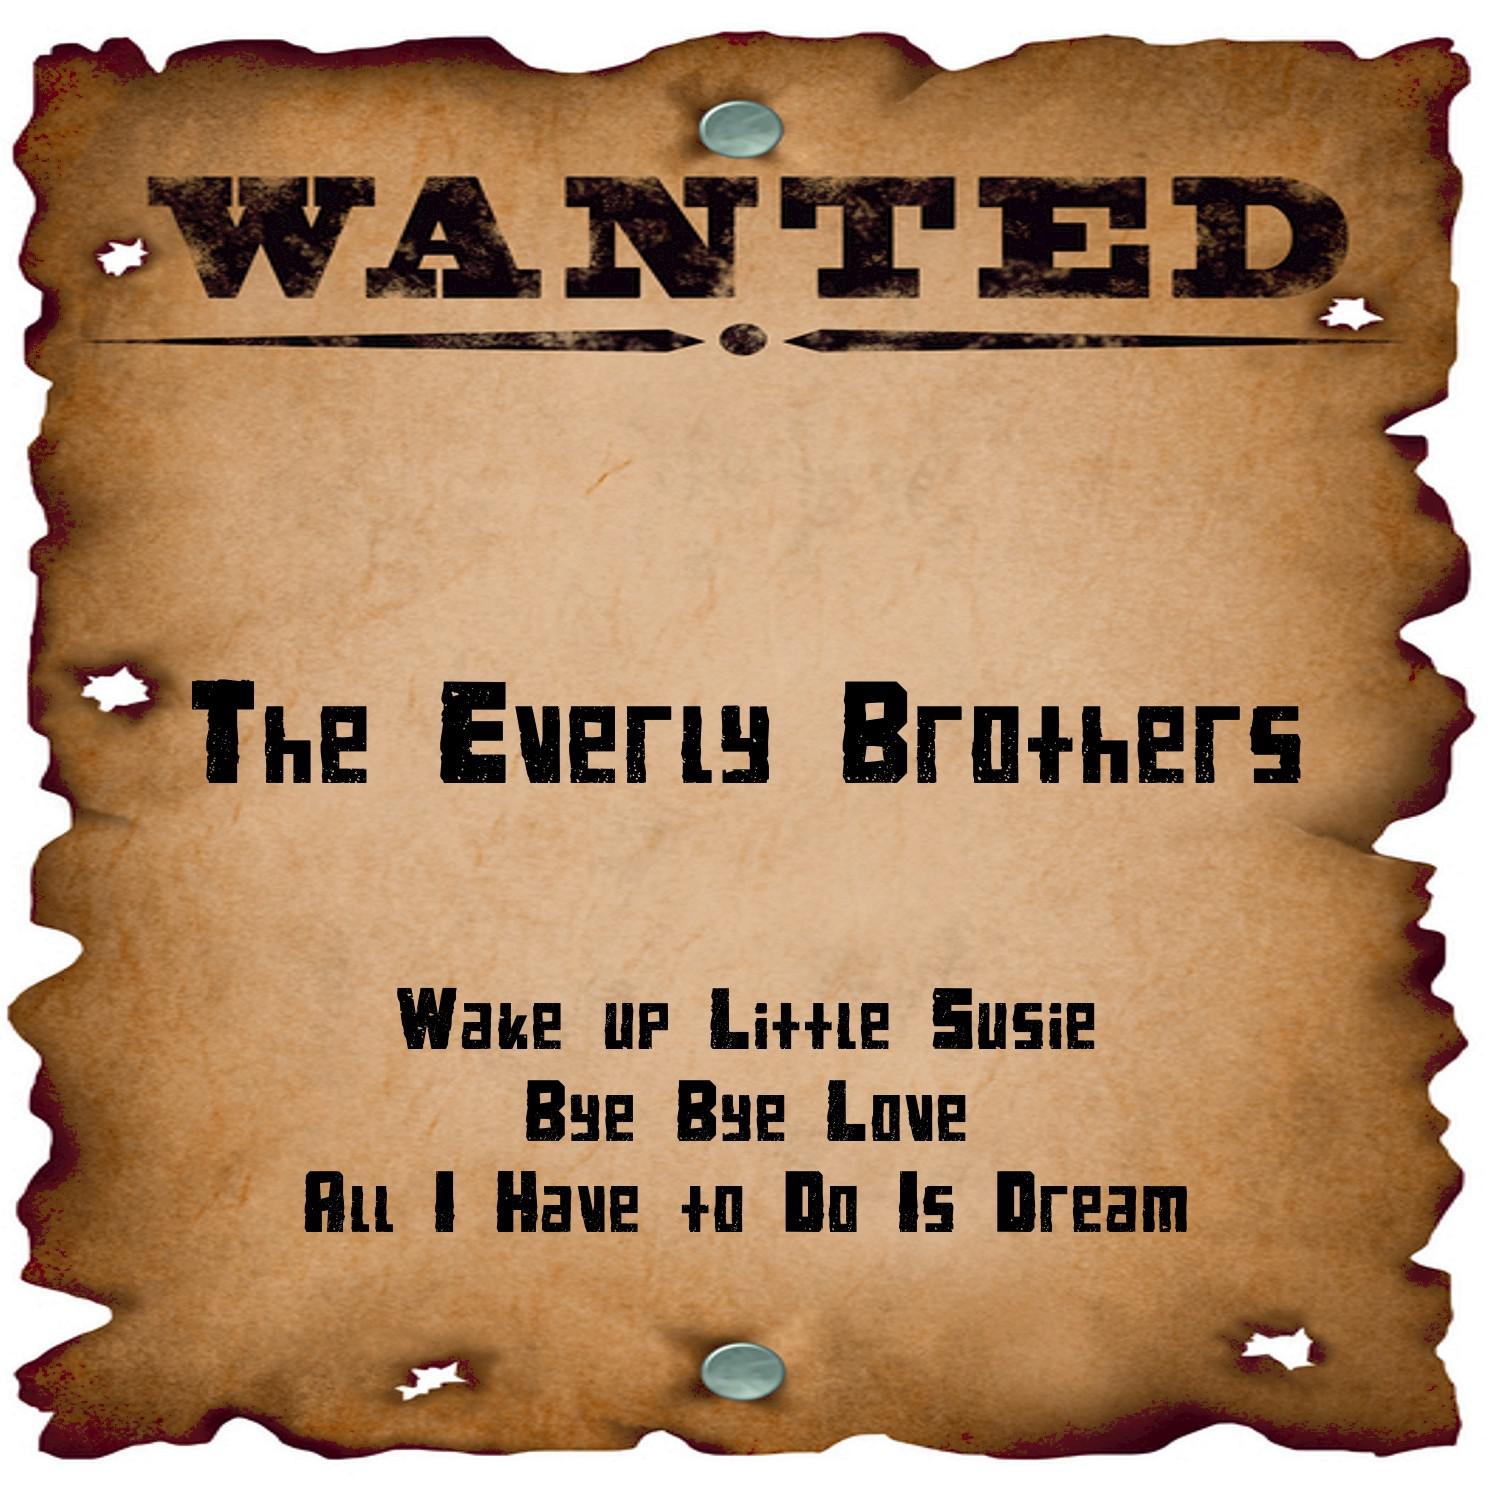 Wanted: The Everly Brothers